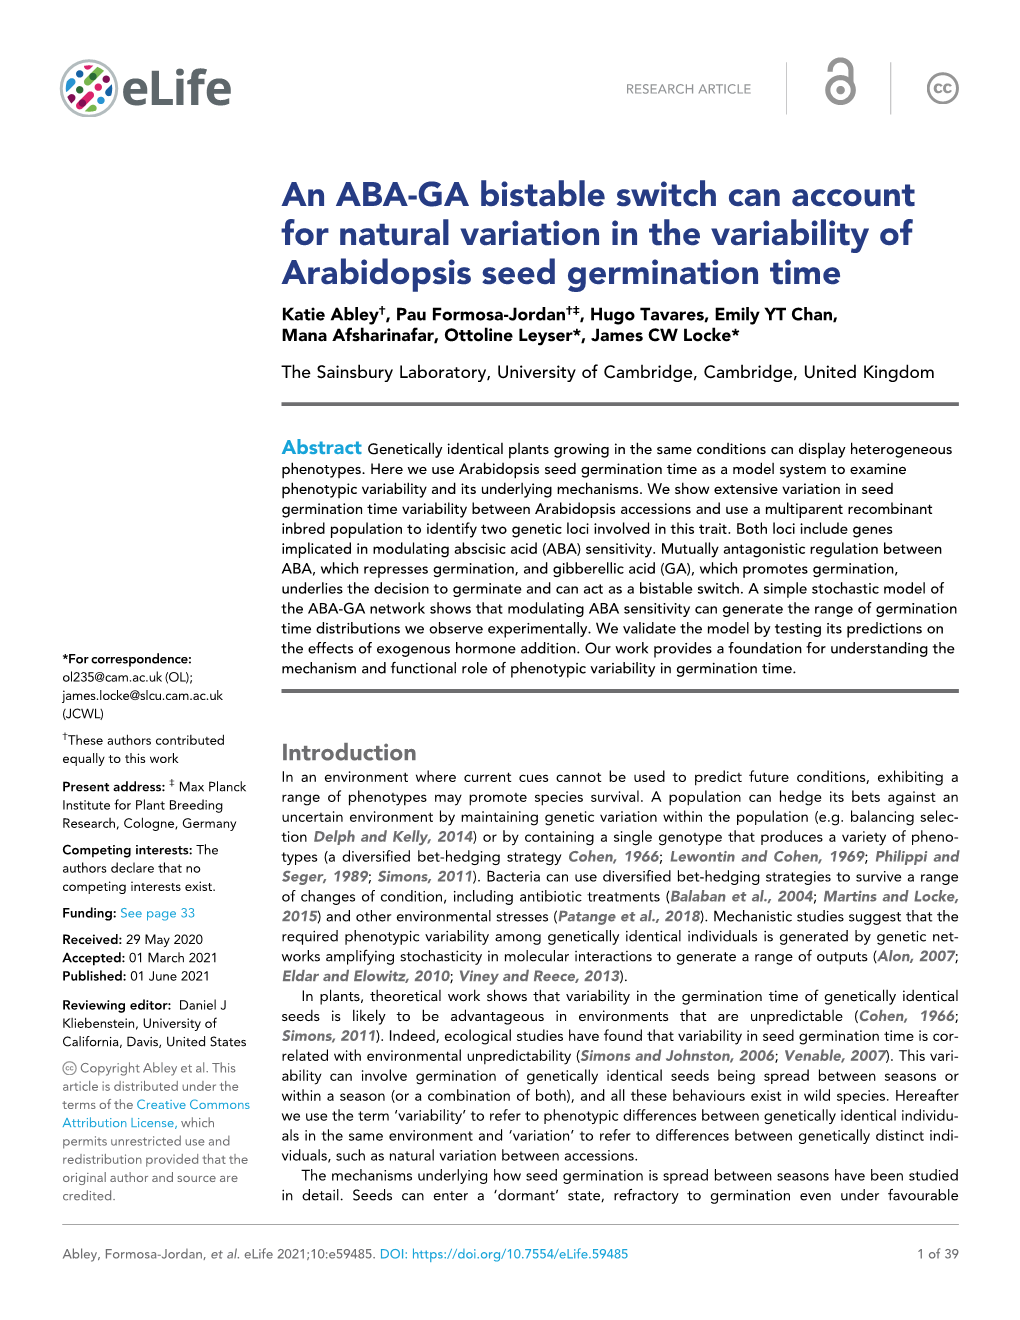 An ABA-GA Bistable Switch Can Account for Natural Variation in The